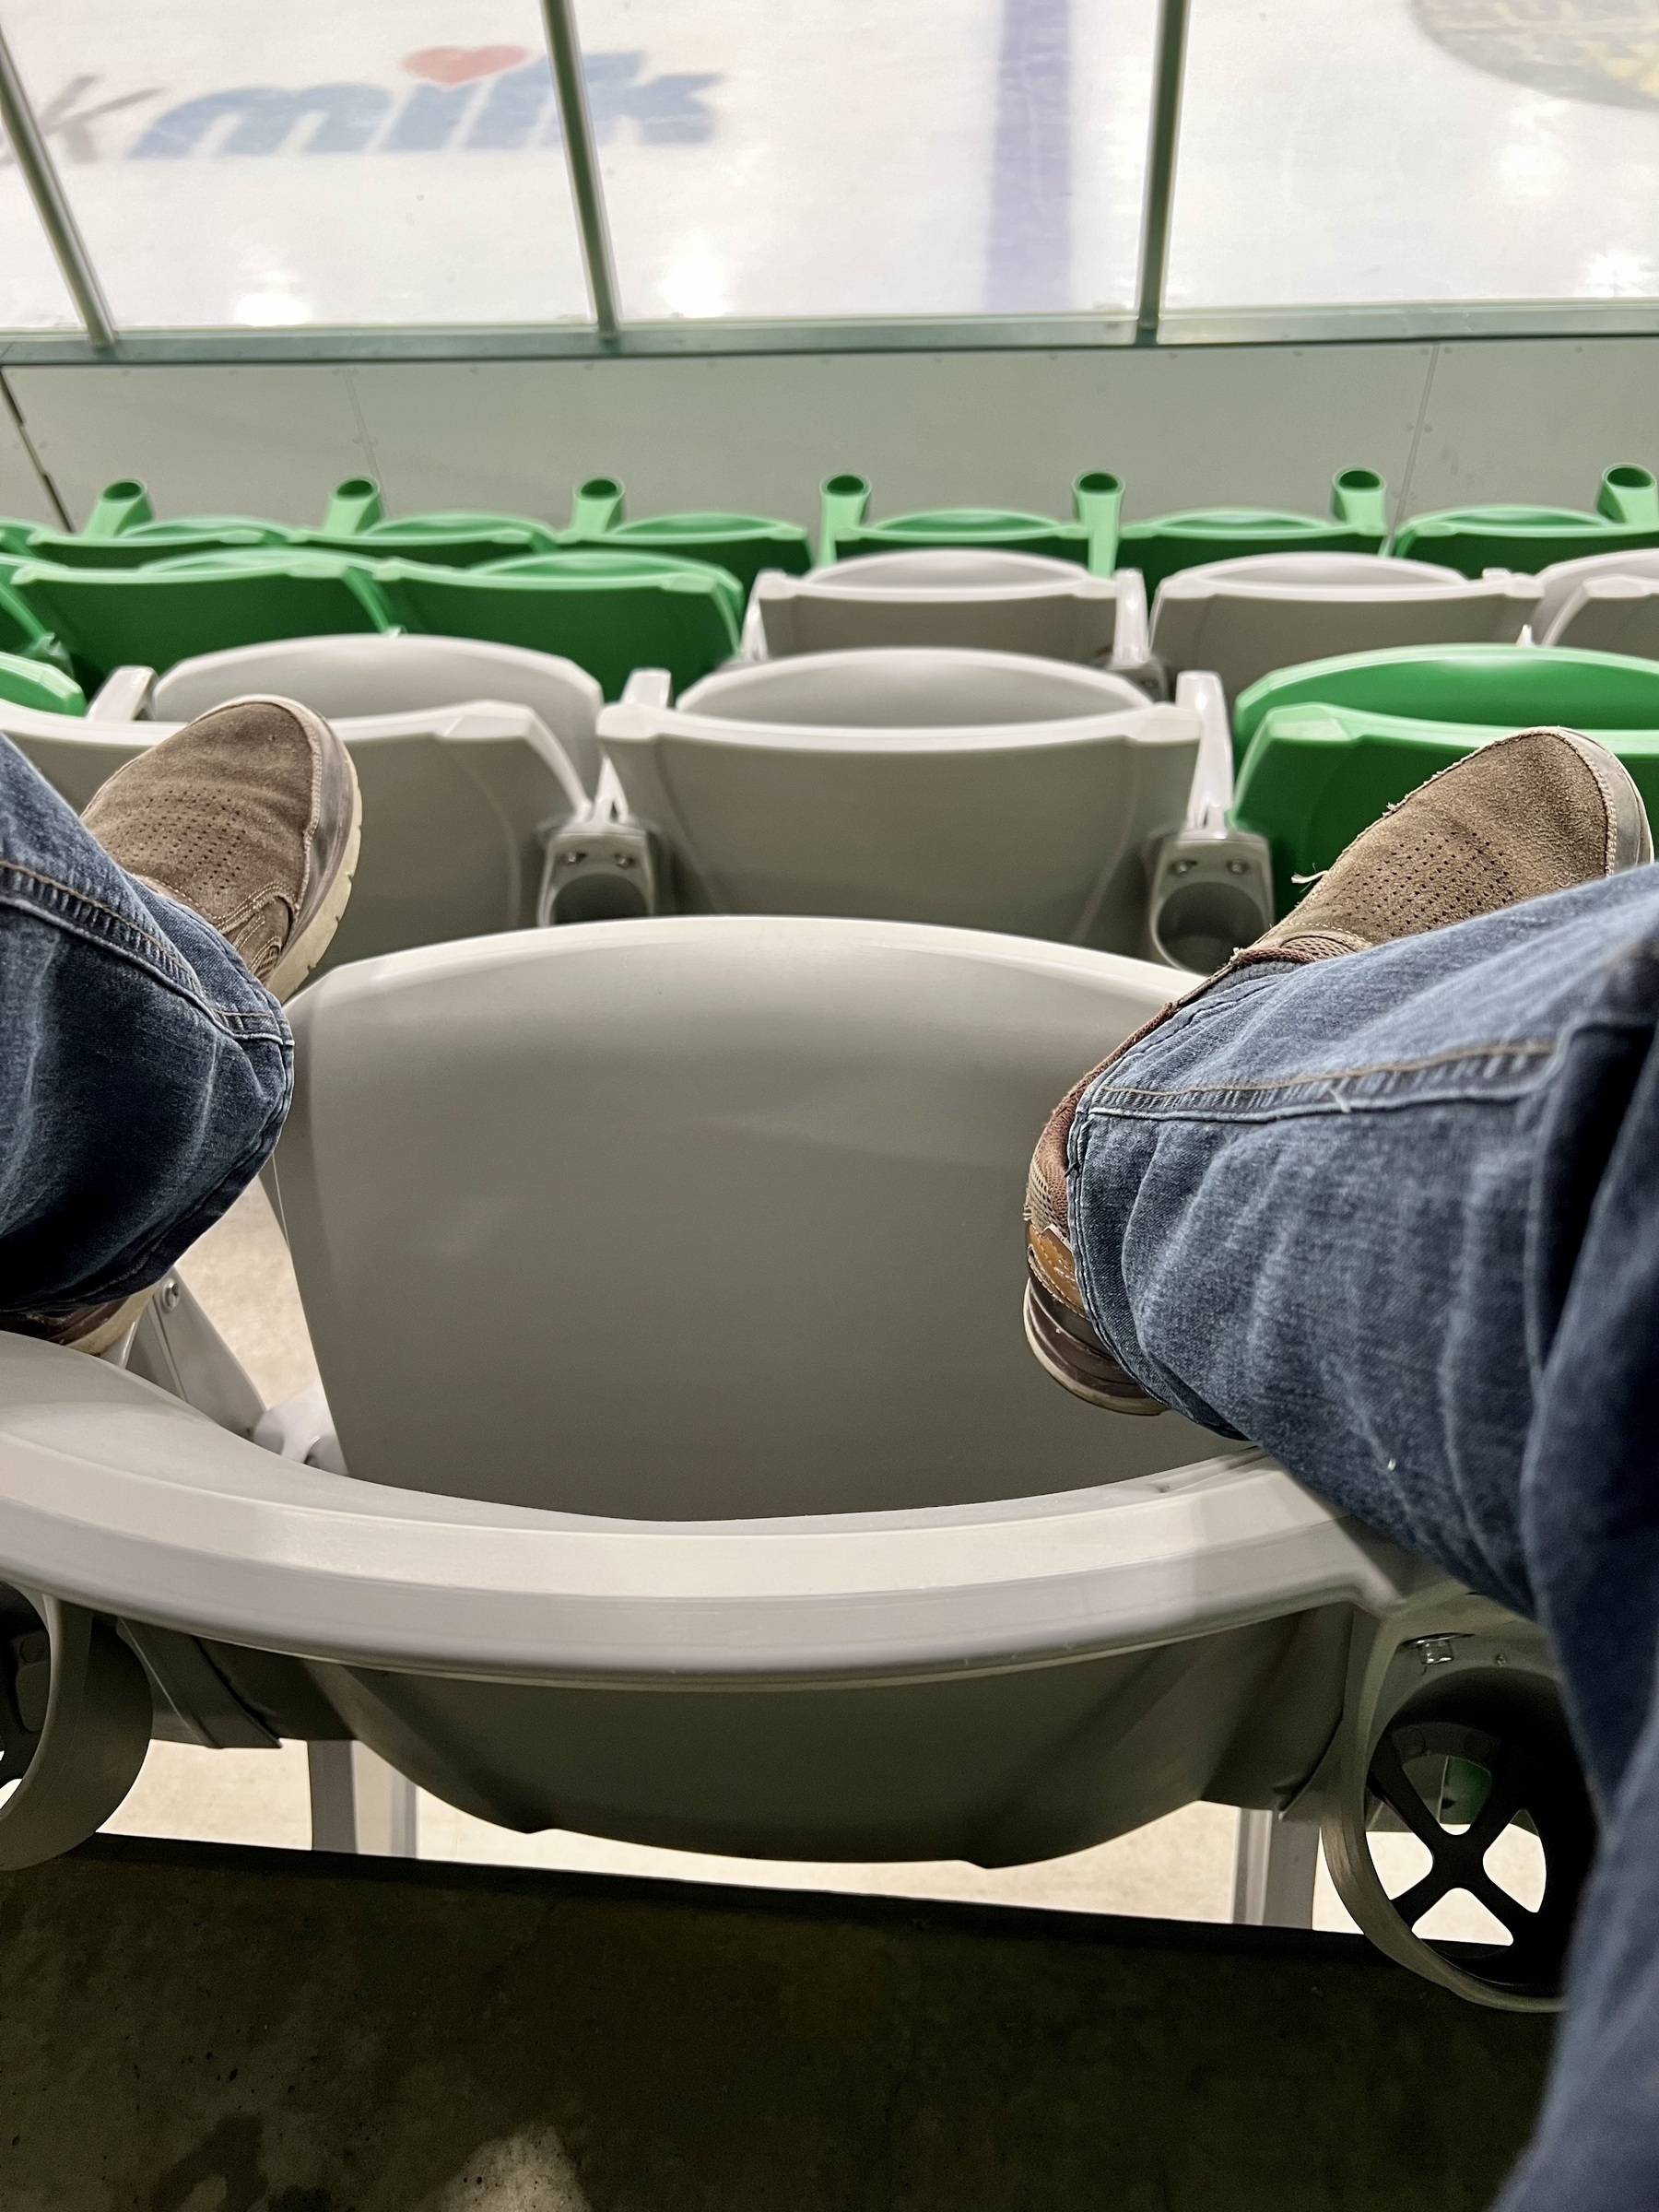 My feet up on the seat in front of me in a hockey rink. 